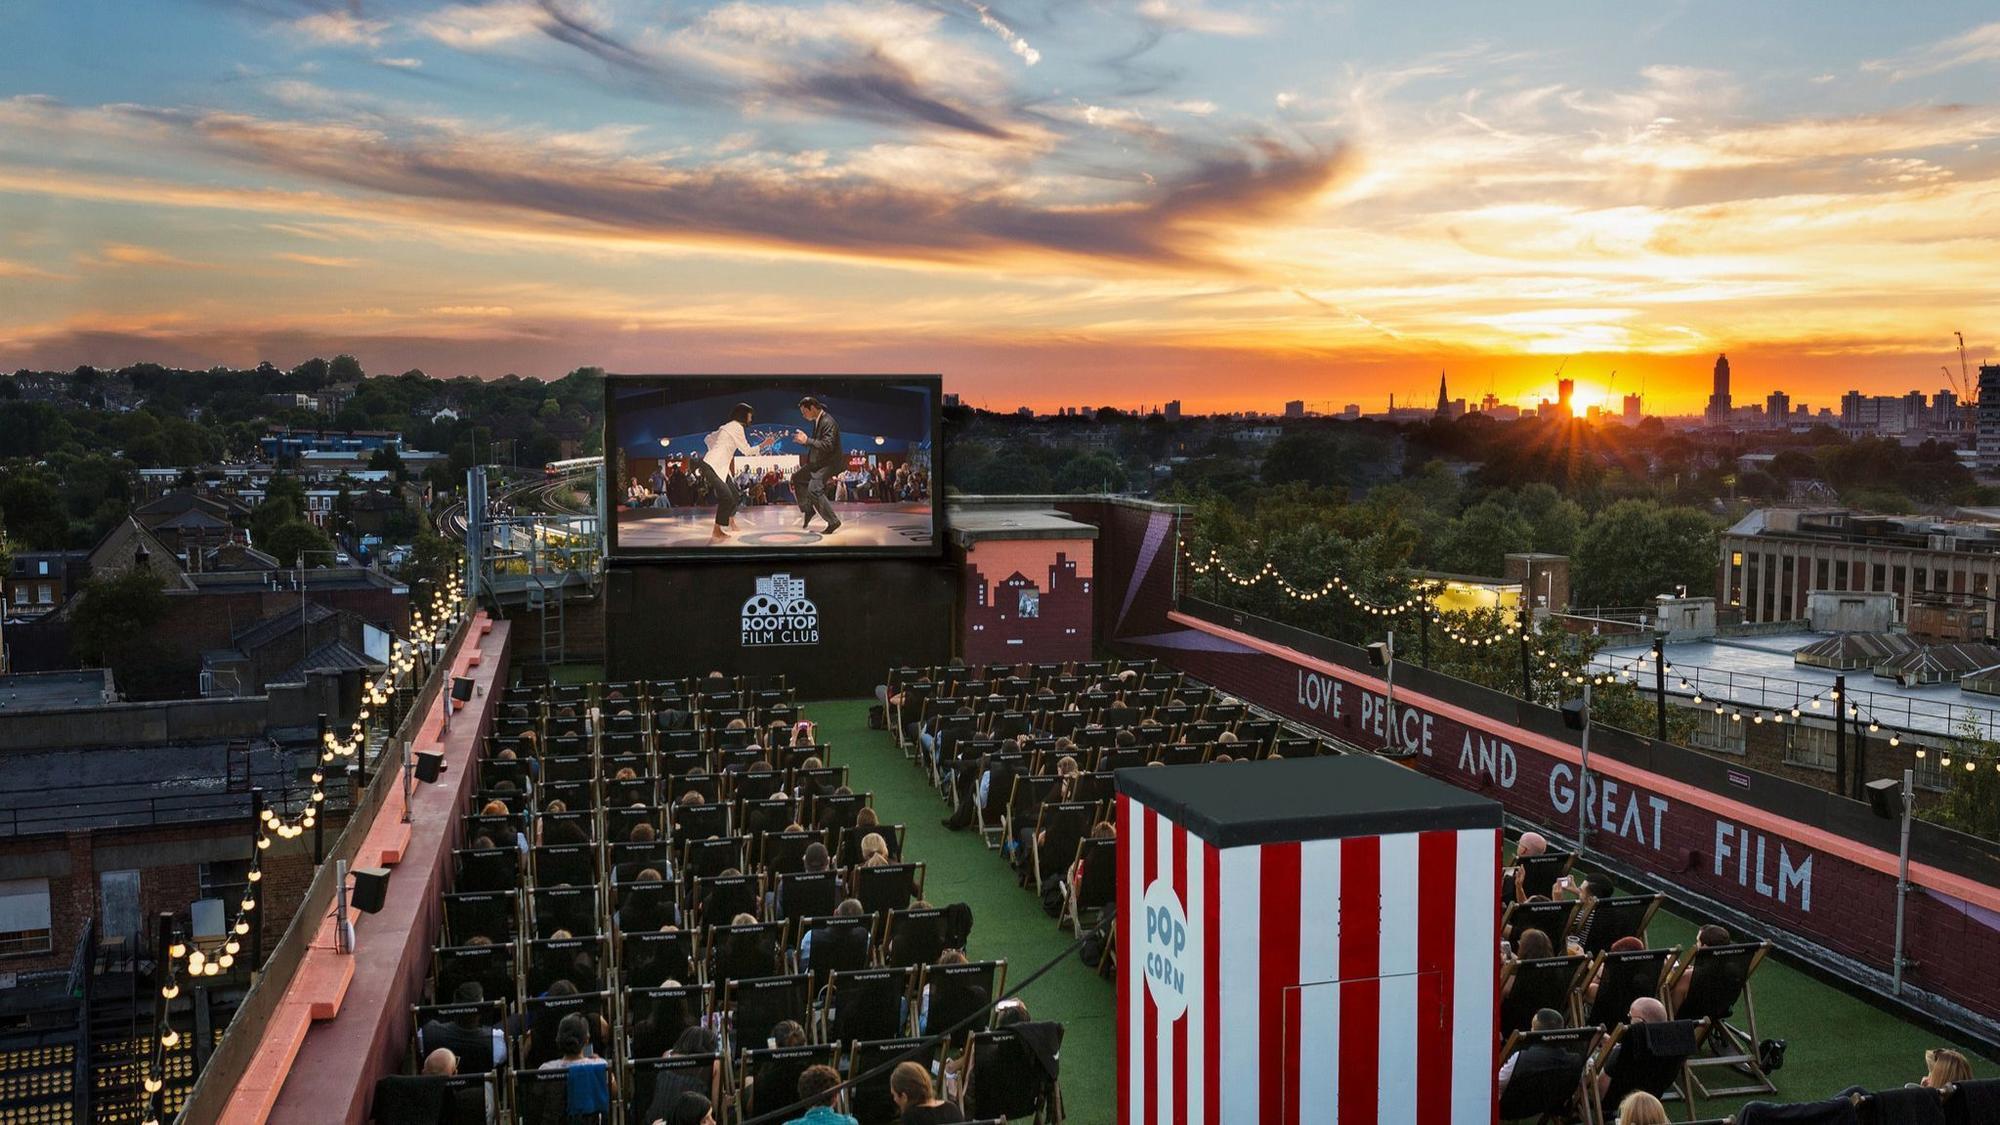 Sunset rooftop screenings on tap as Rooftop Cinema Club launches in San